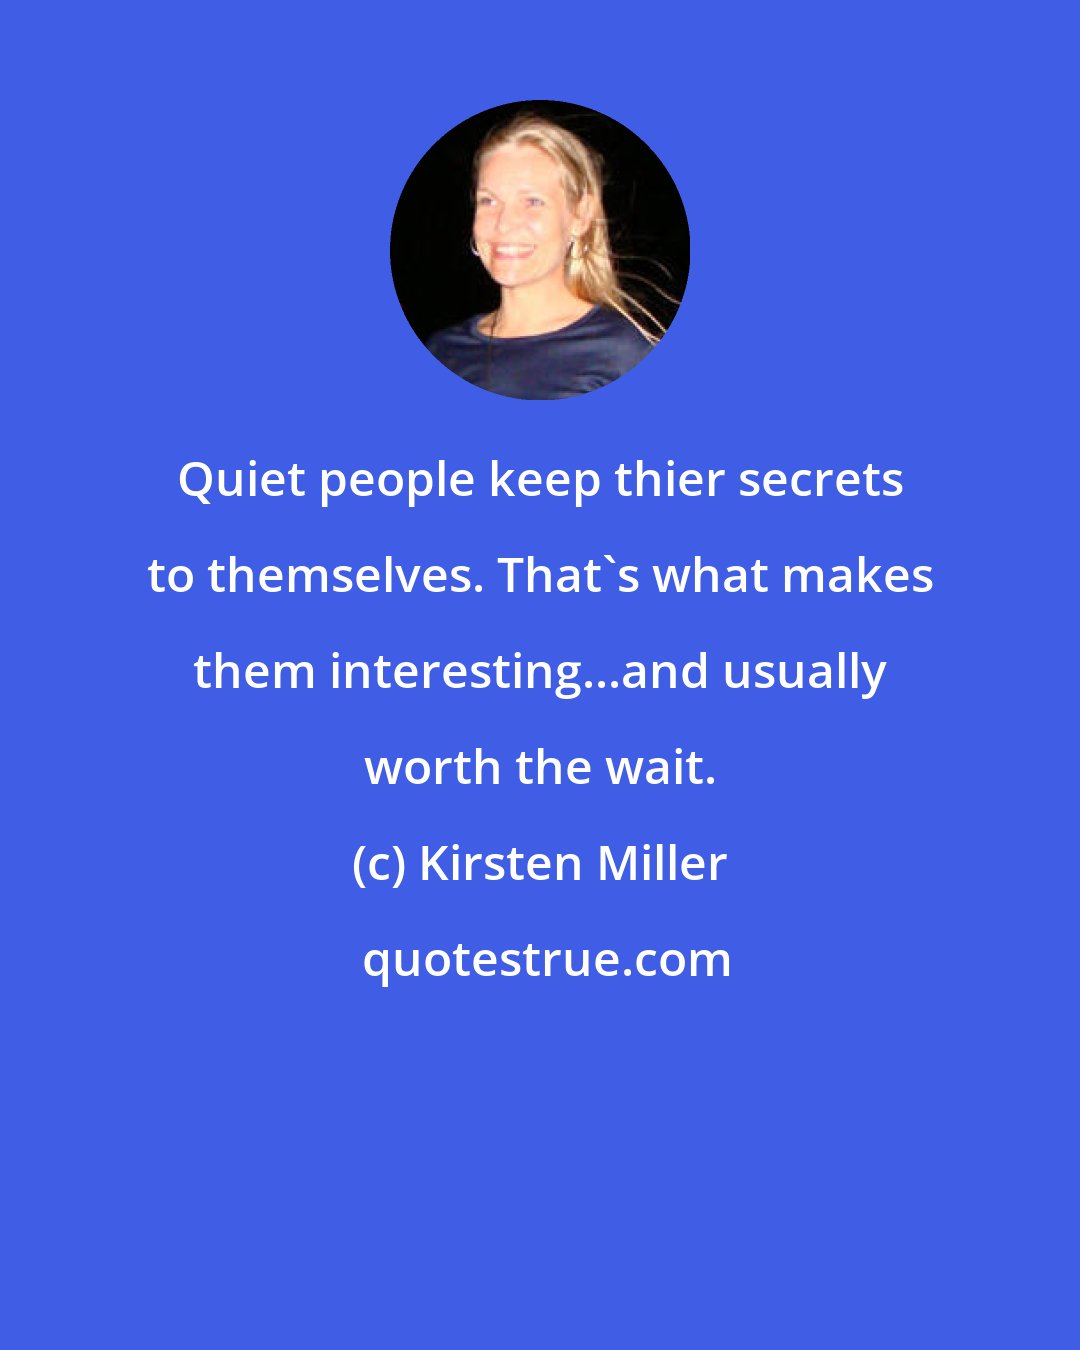 Kirsten Miller: Quiet people keep thier secrets to themselves. That's what makes them interesting...and usually worth the wait.